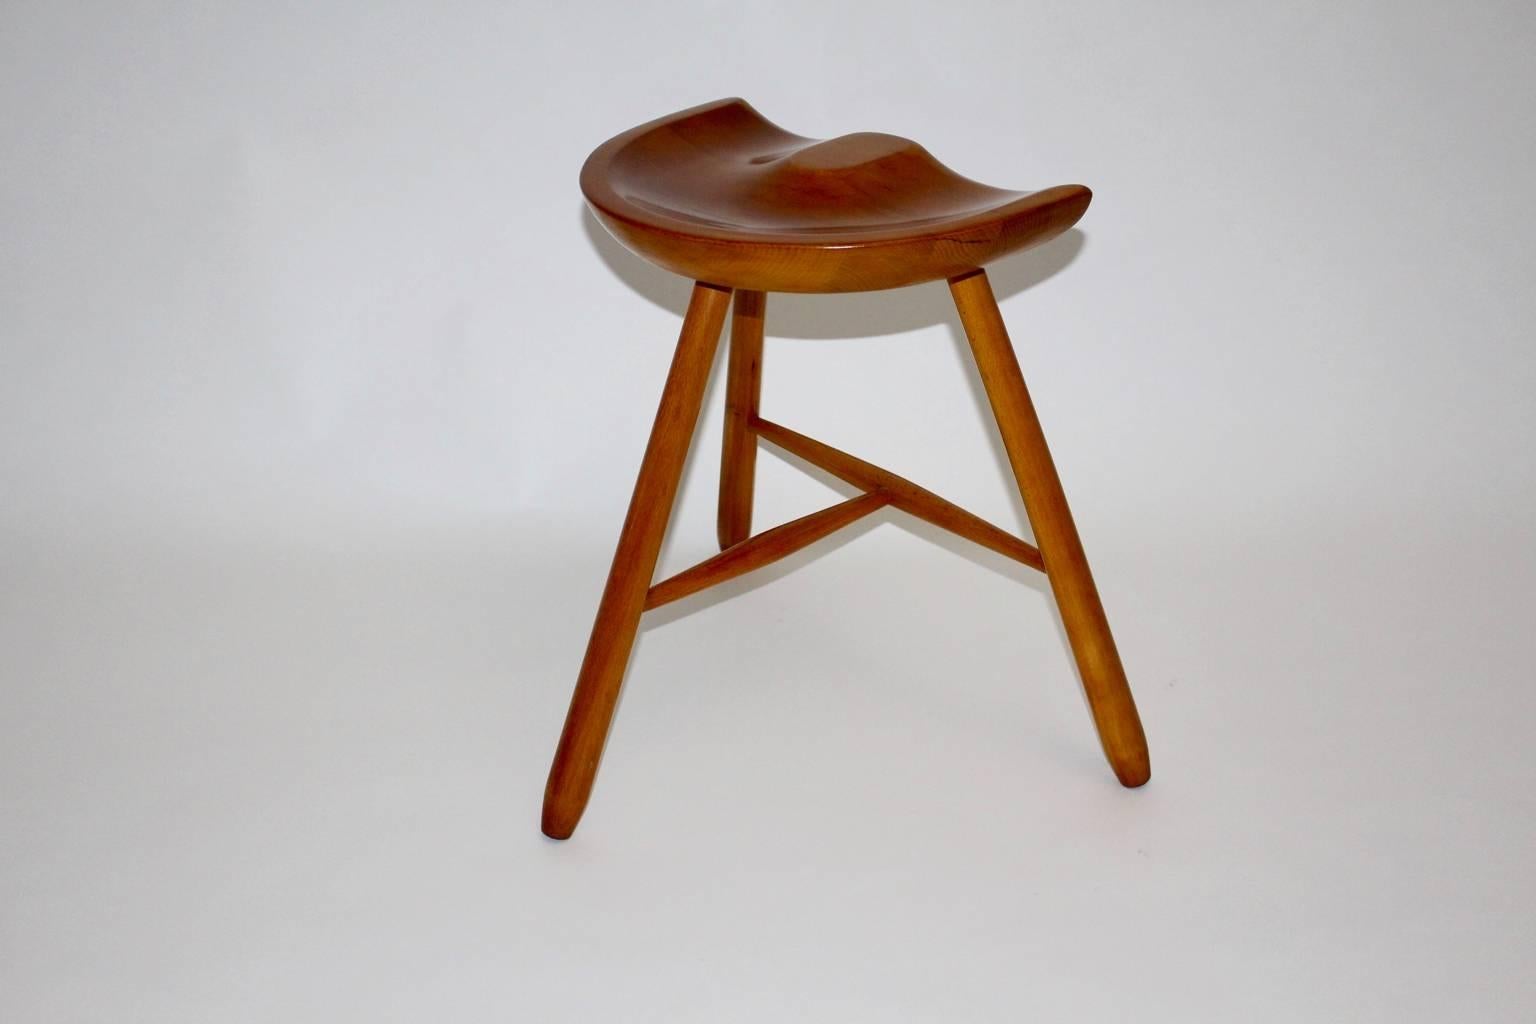 Art Deco Vintage Brown Maple Stool with Three Legs circa 1933 Vienna For Sale 1